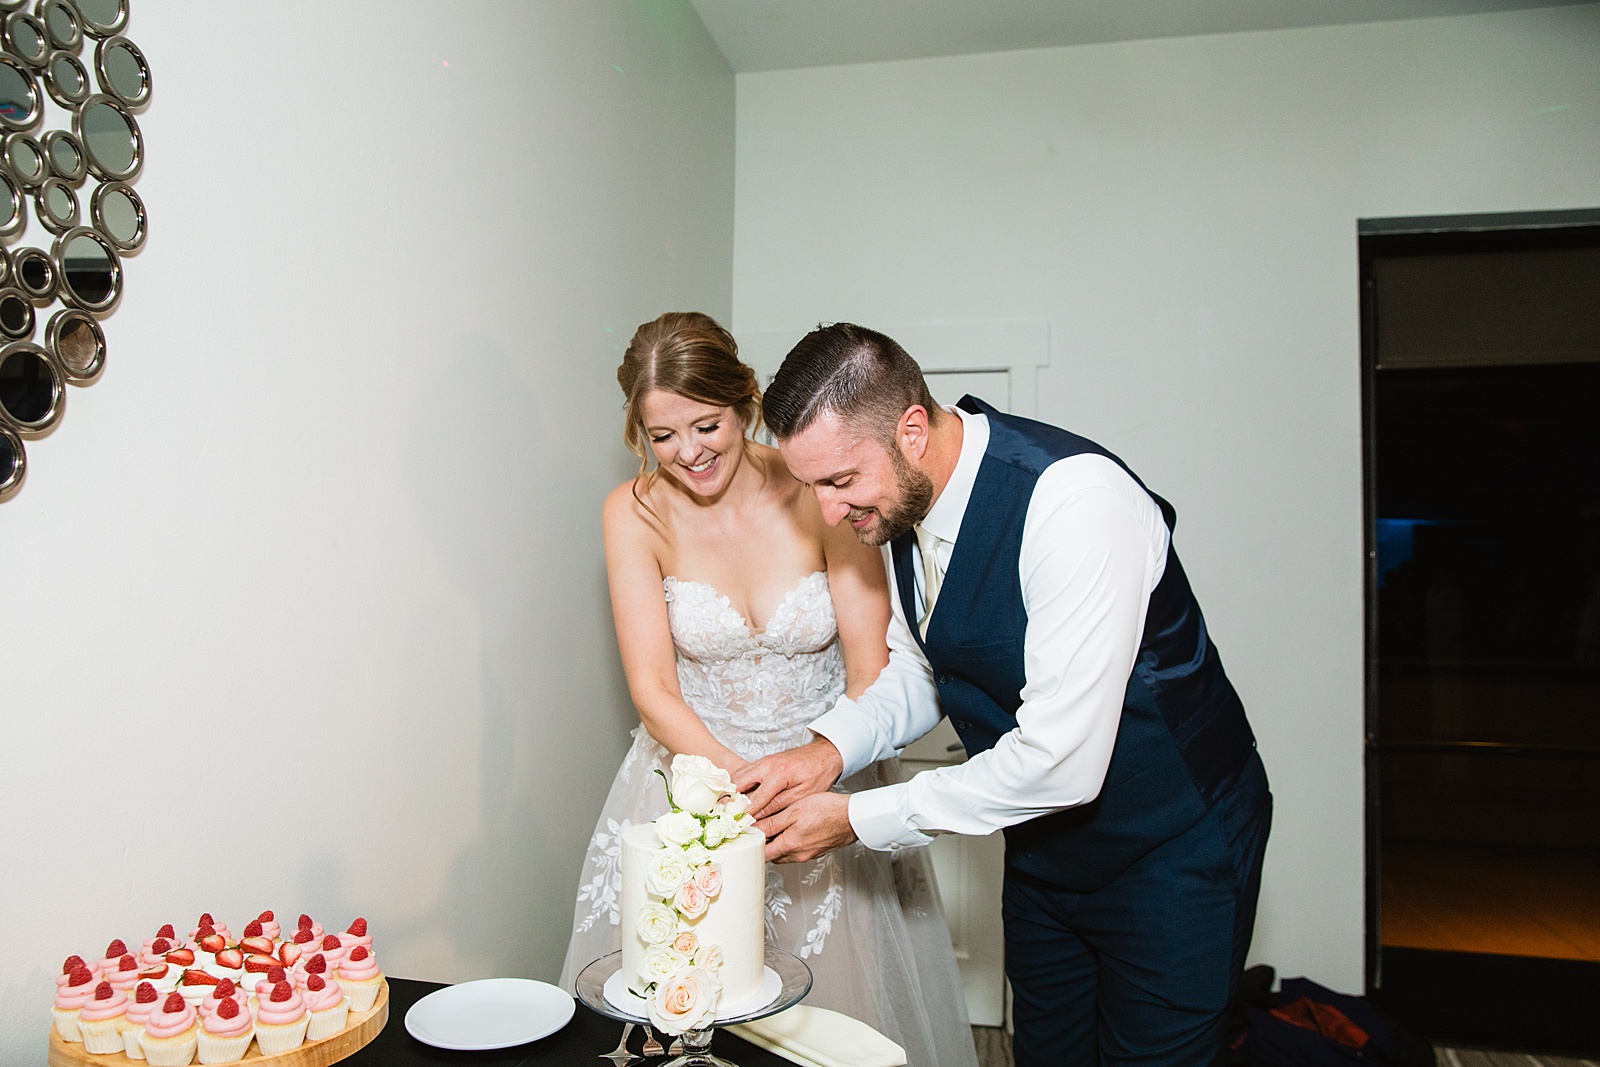 Bride & Groom cutting their wedding cake at their Sanctuary at Camelback wedding reception by Arizona wedding photographer Juniper and Co Photography.